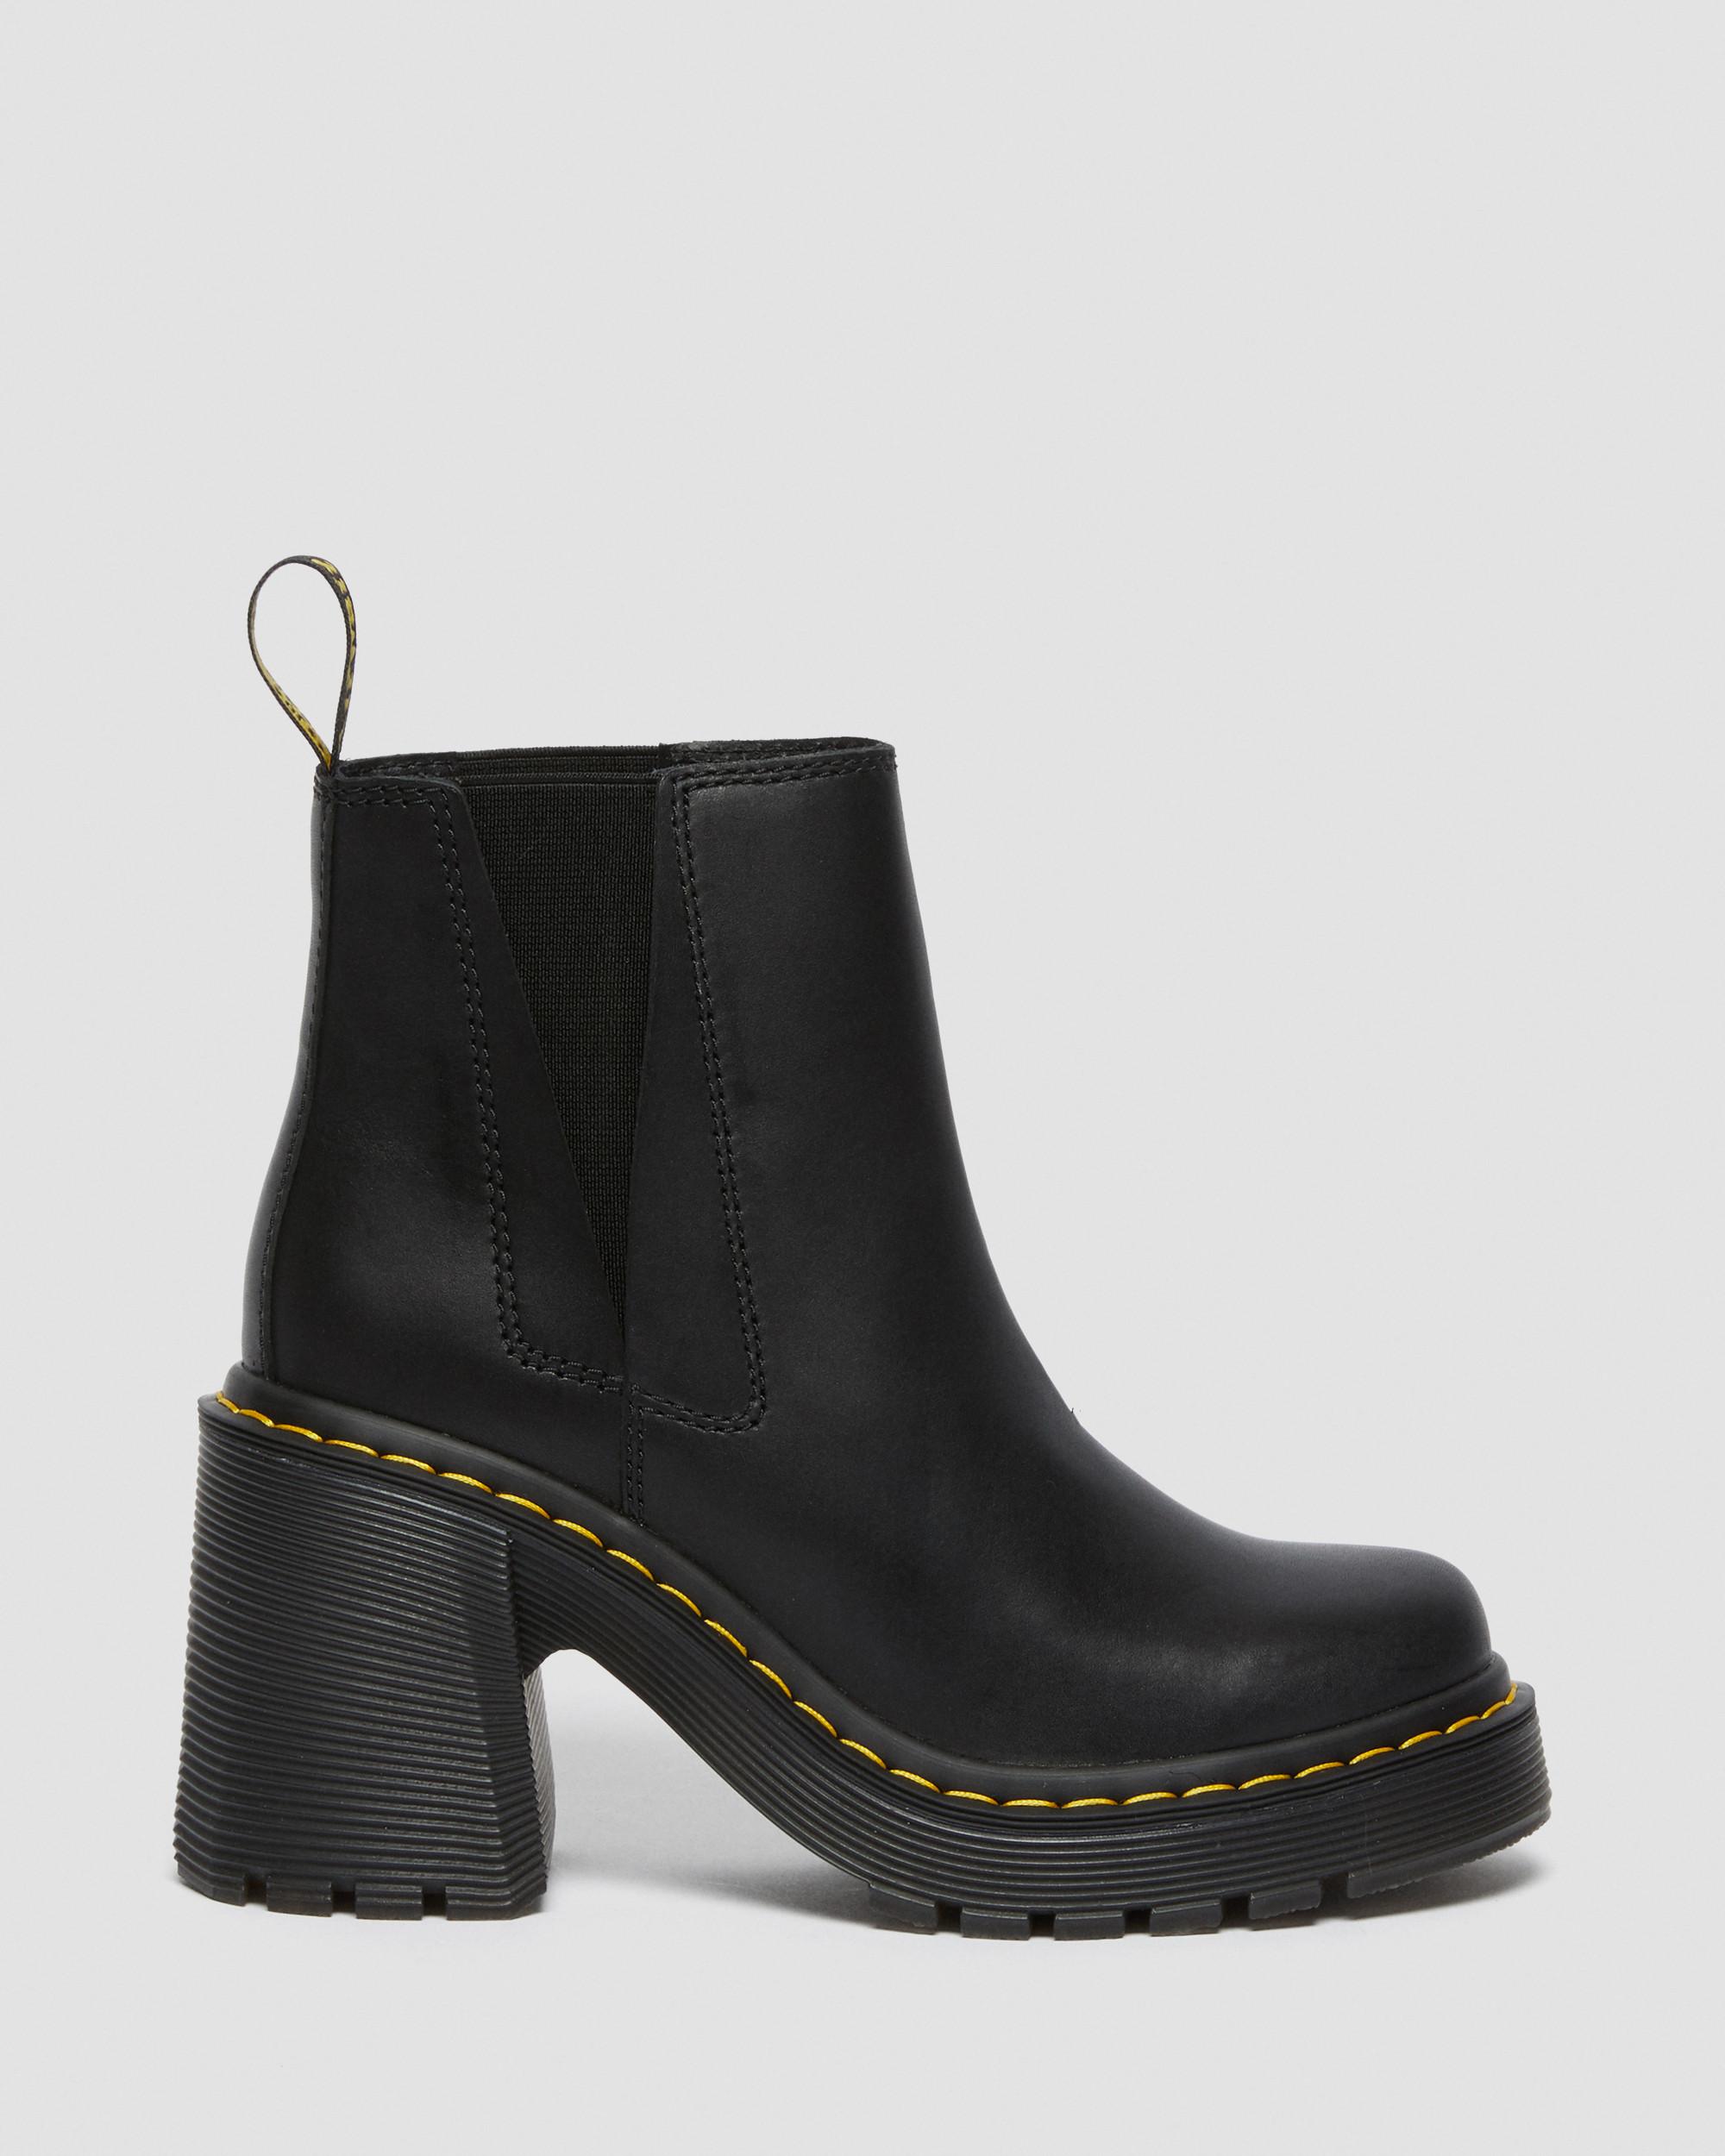 Spence Leather Flared Heel Chelsea Boots | Dr. Martens